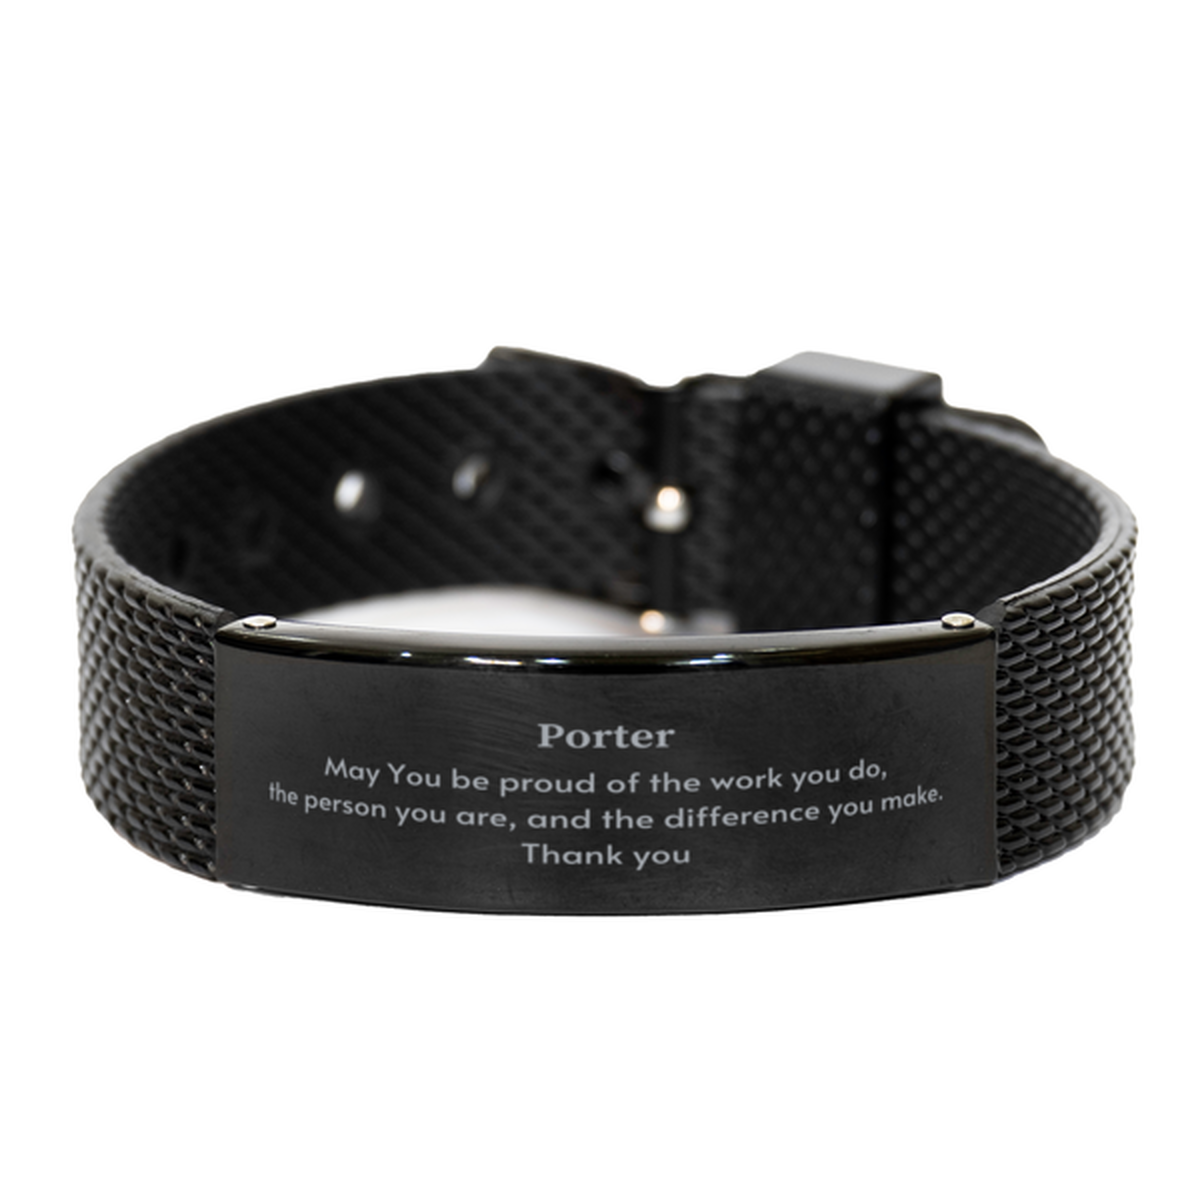 Heartwarming Black Shark Mesh Bracelet Retirement Coworkers Gifts for Porter, Porter May You be proud of the work you do, the person you are Gifts for Boss Men Women Friends